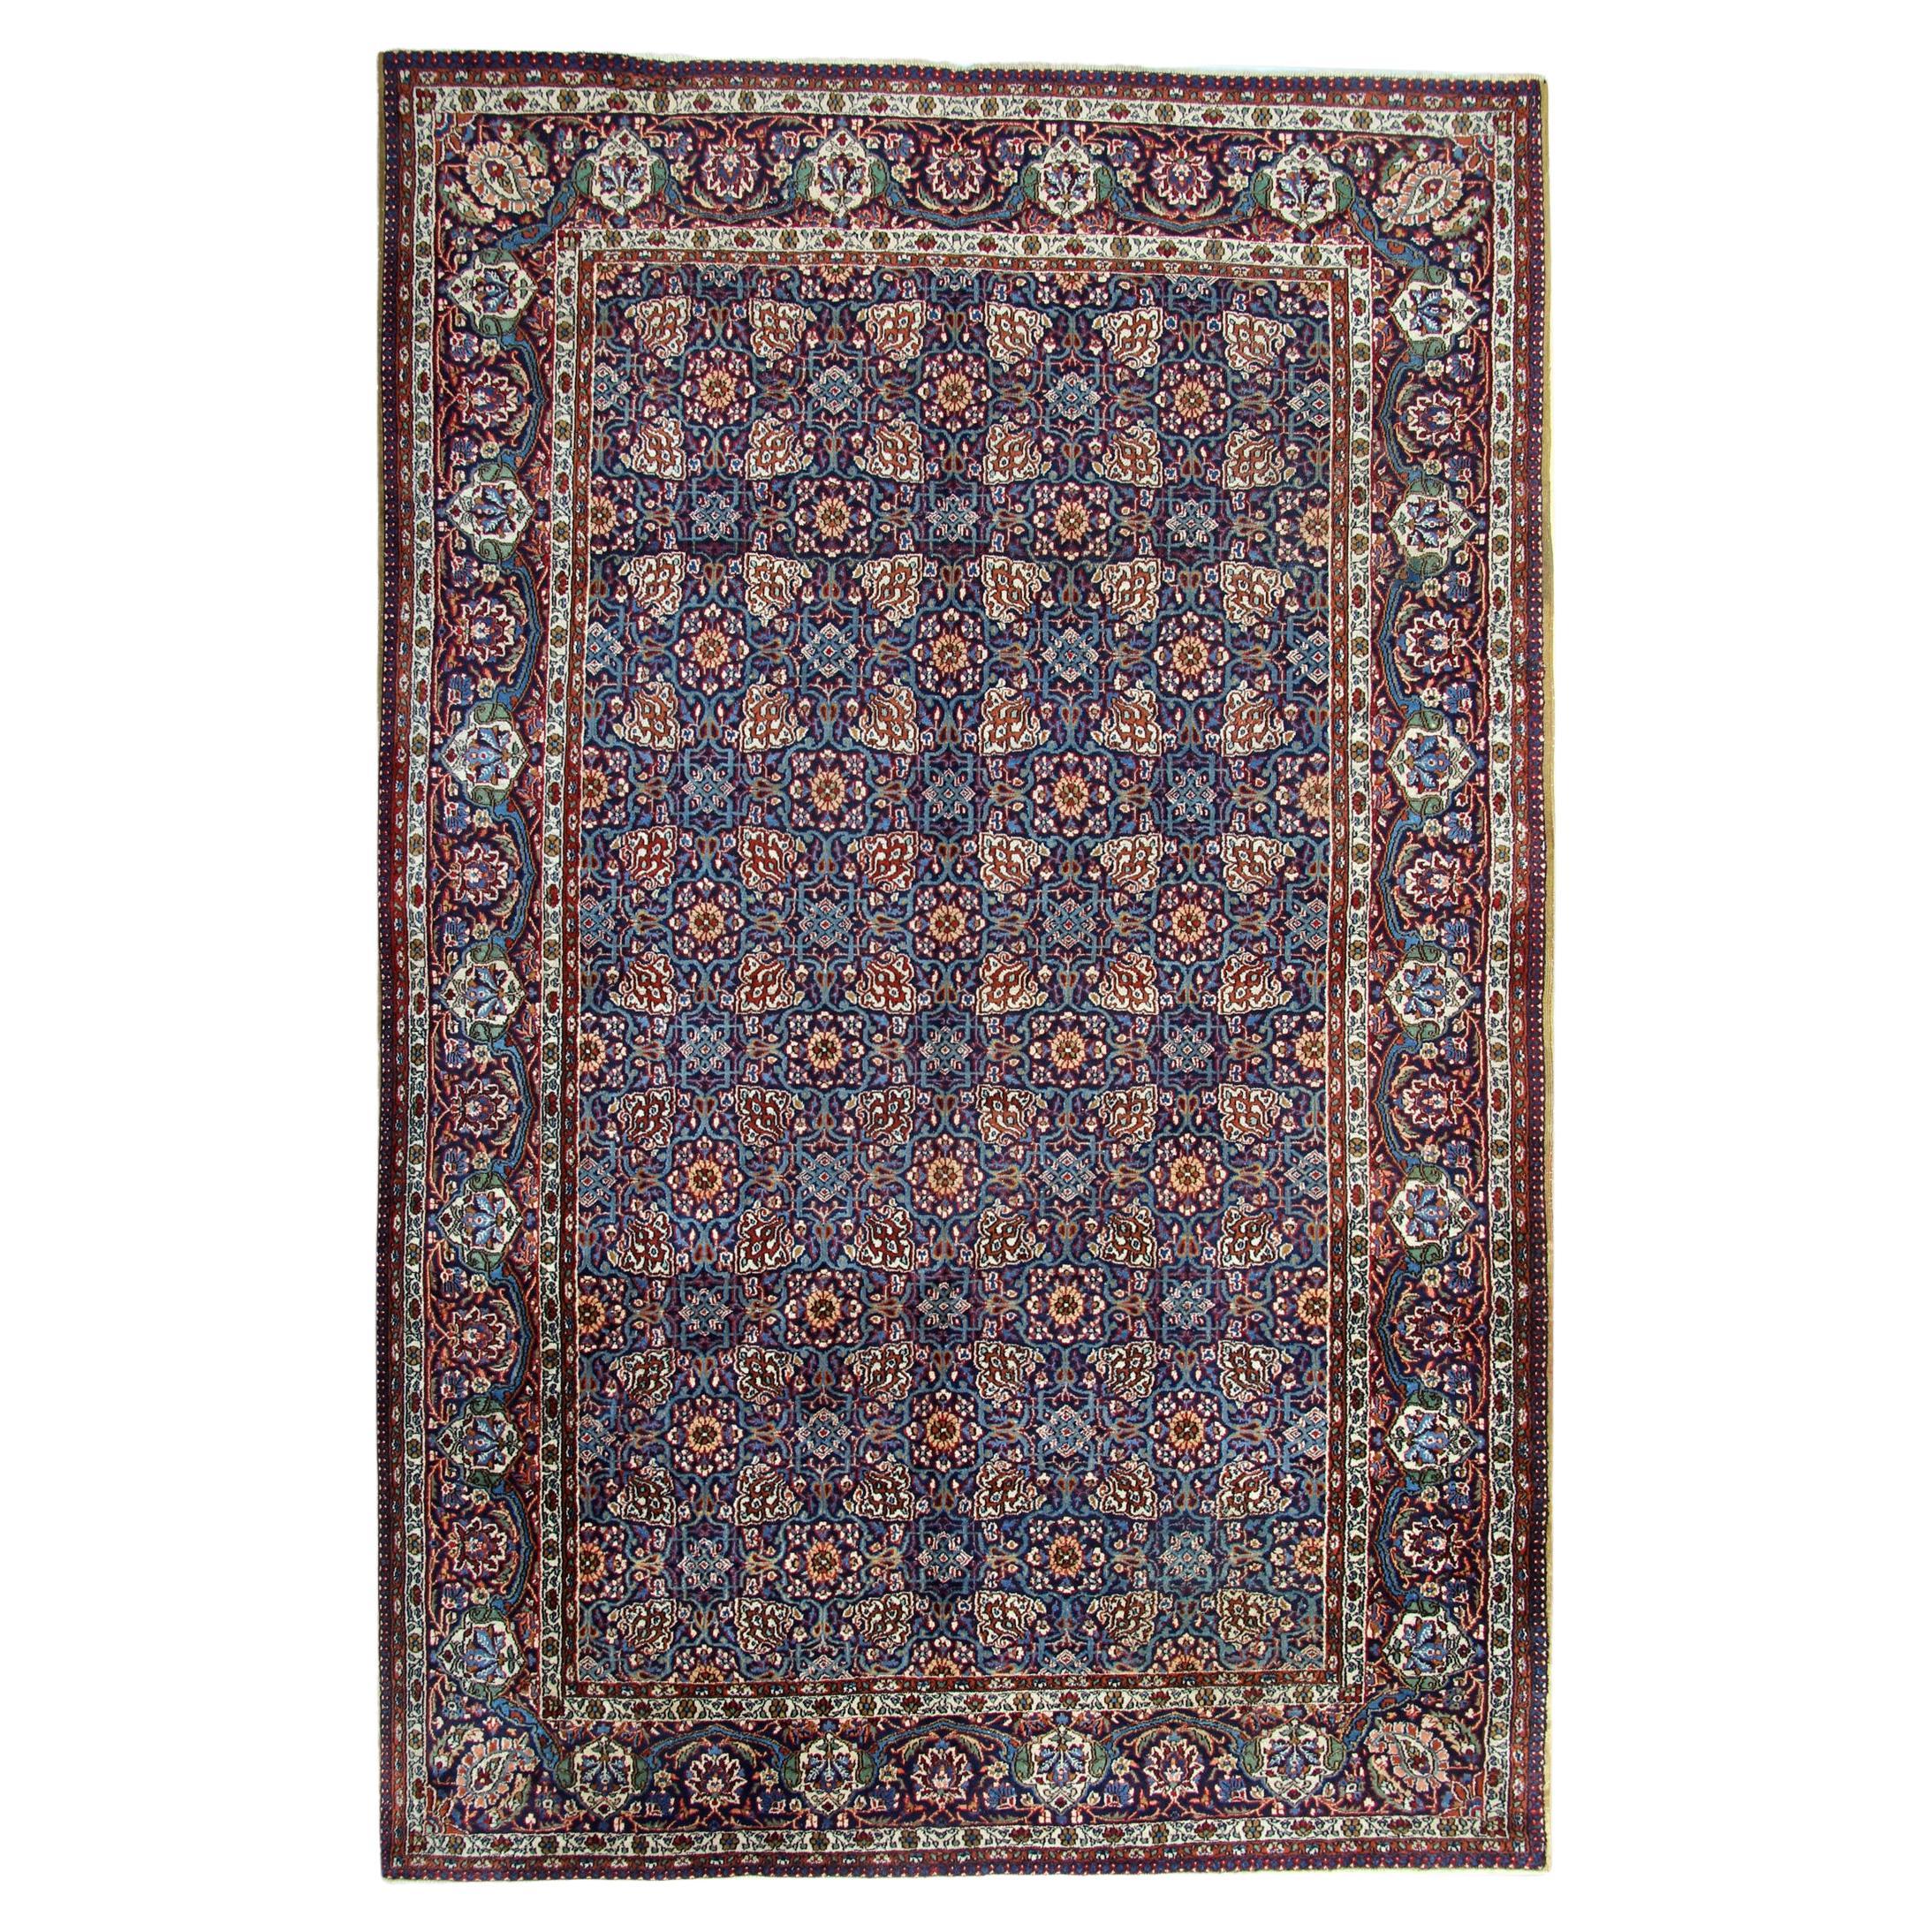 Antique Rugs Oriental Wool Blue Rug Geometric Living Room Rugs for Sale 137x207 For Sale